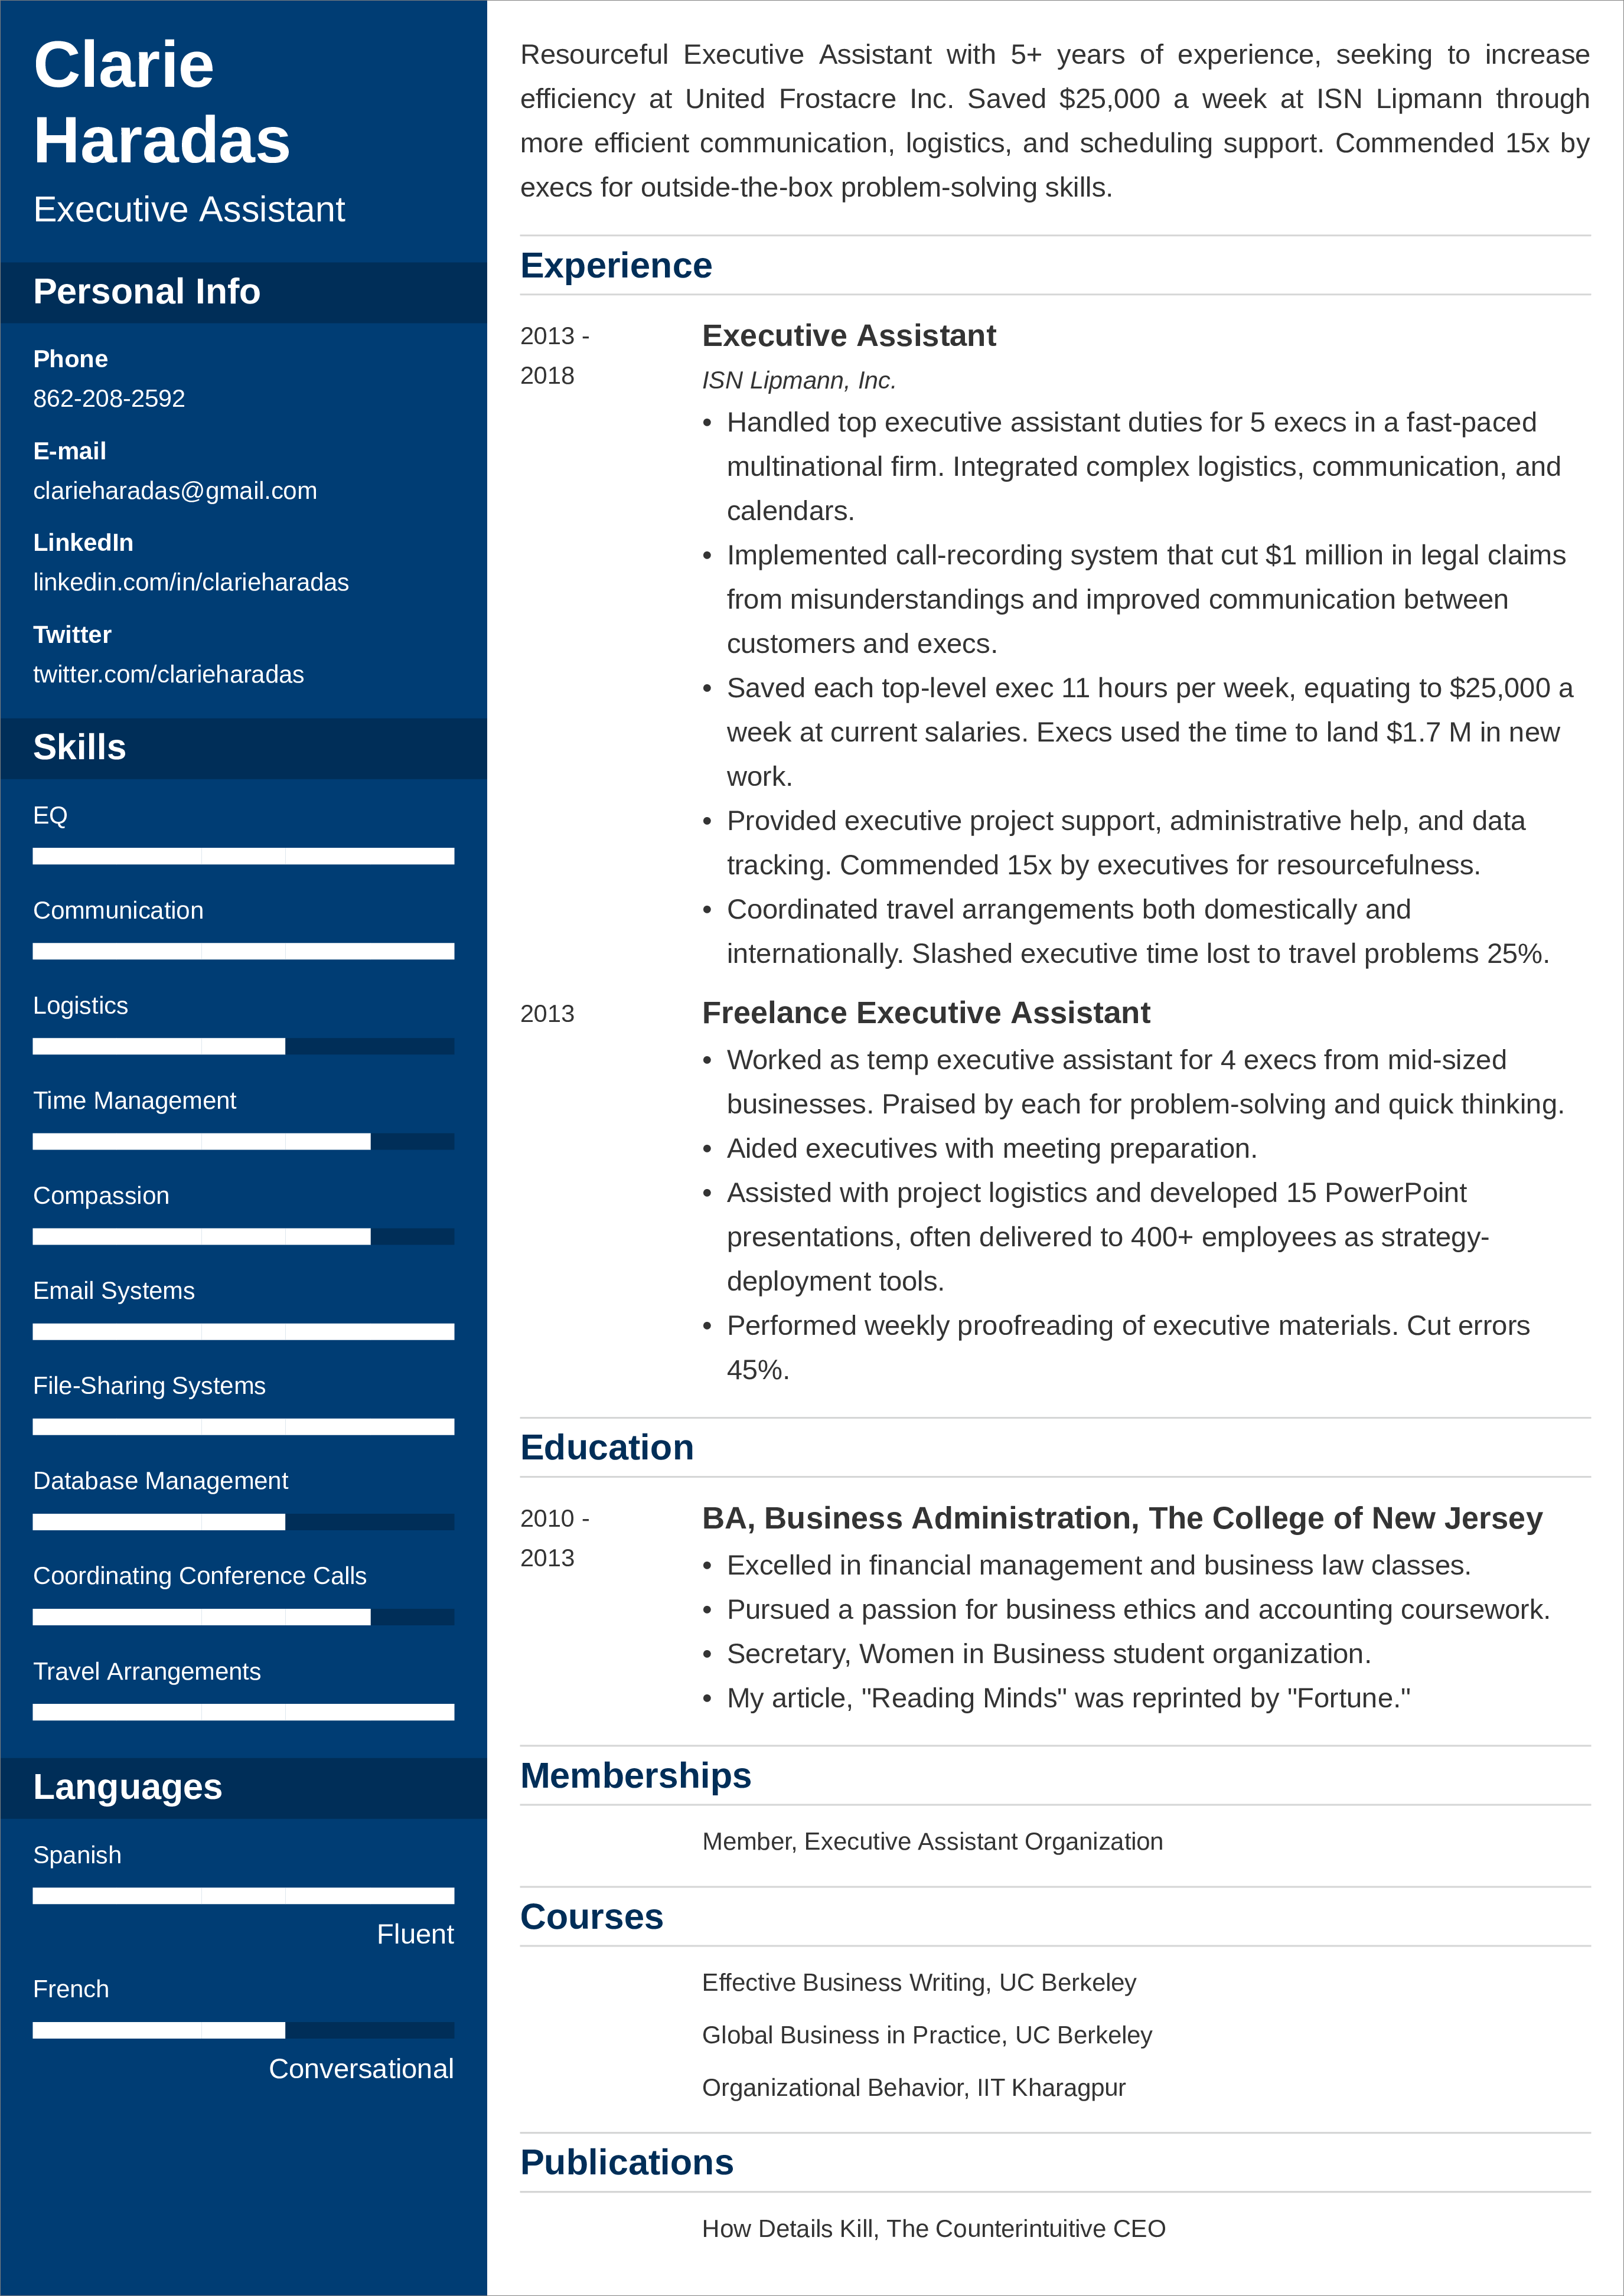 education on a resume example